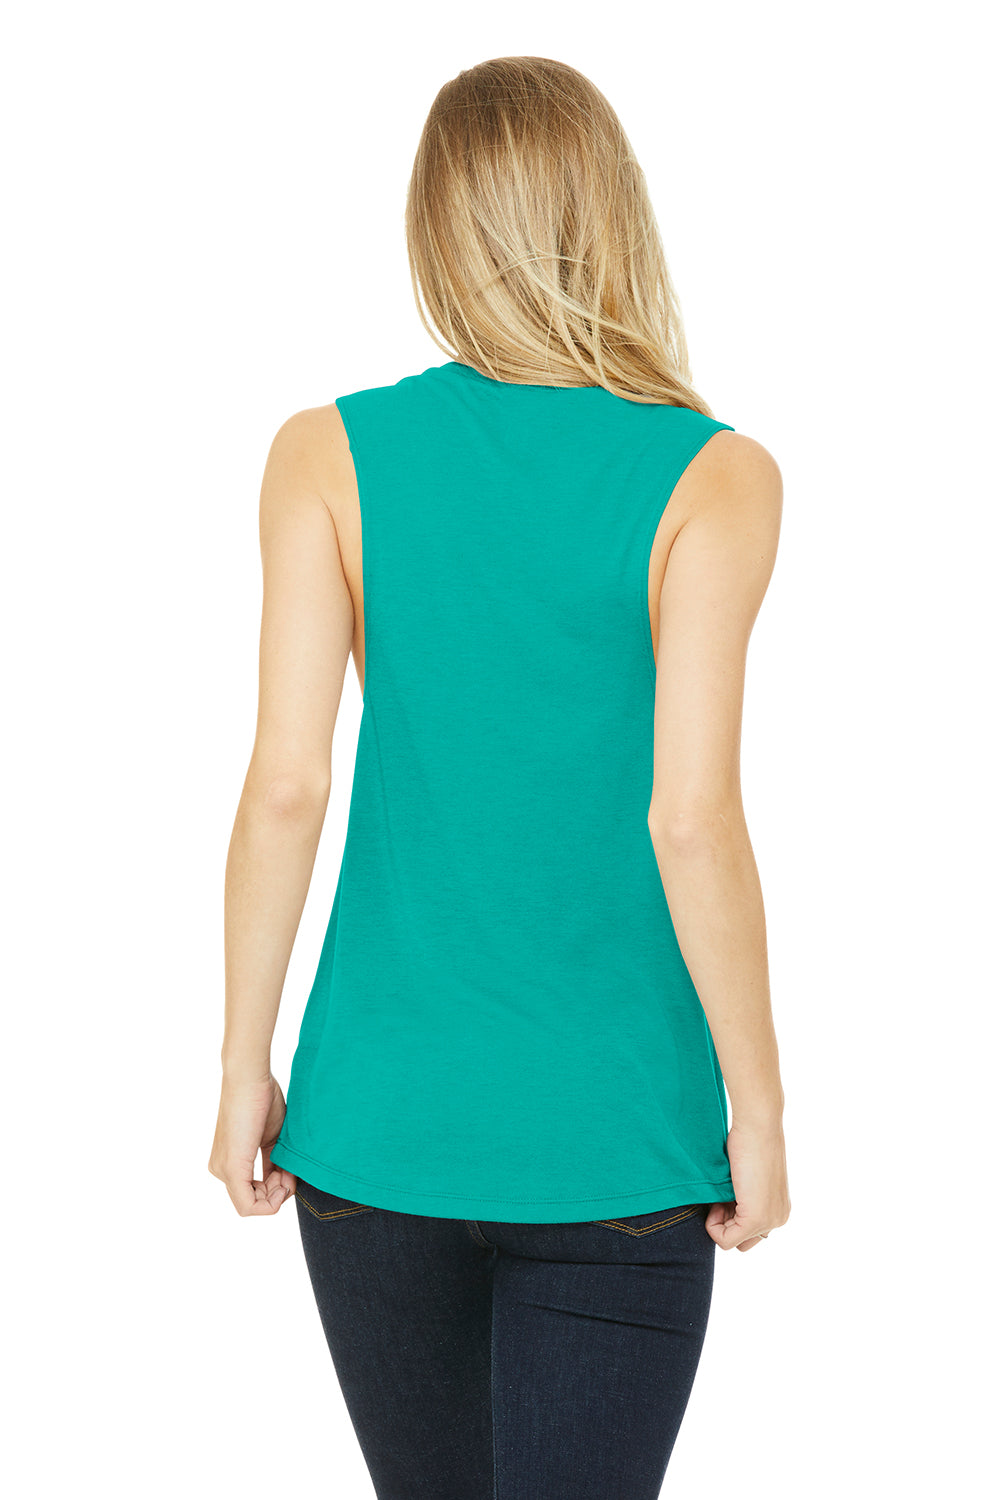 Bella + Canvas BC8803/B8803/8803 Womens Flowy Muscle Tank Top Teal Green Model Back